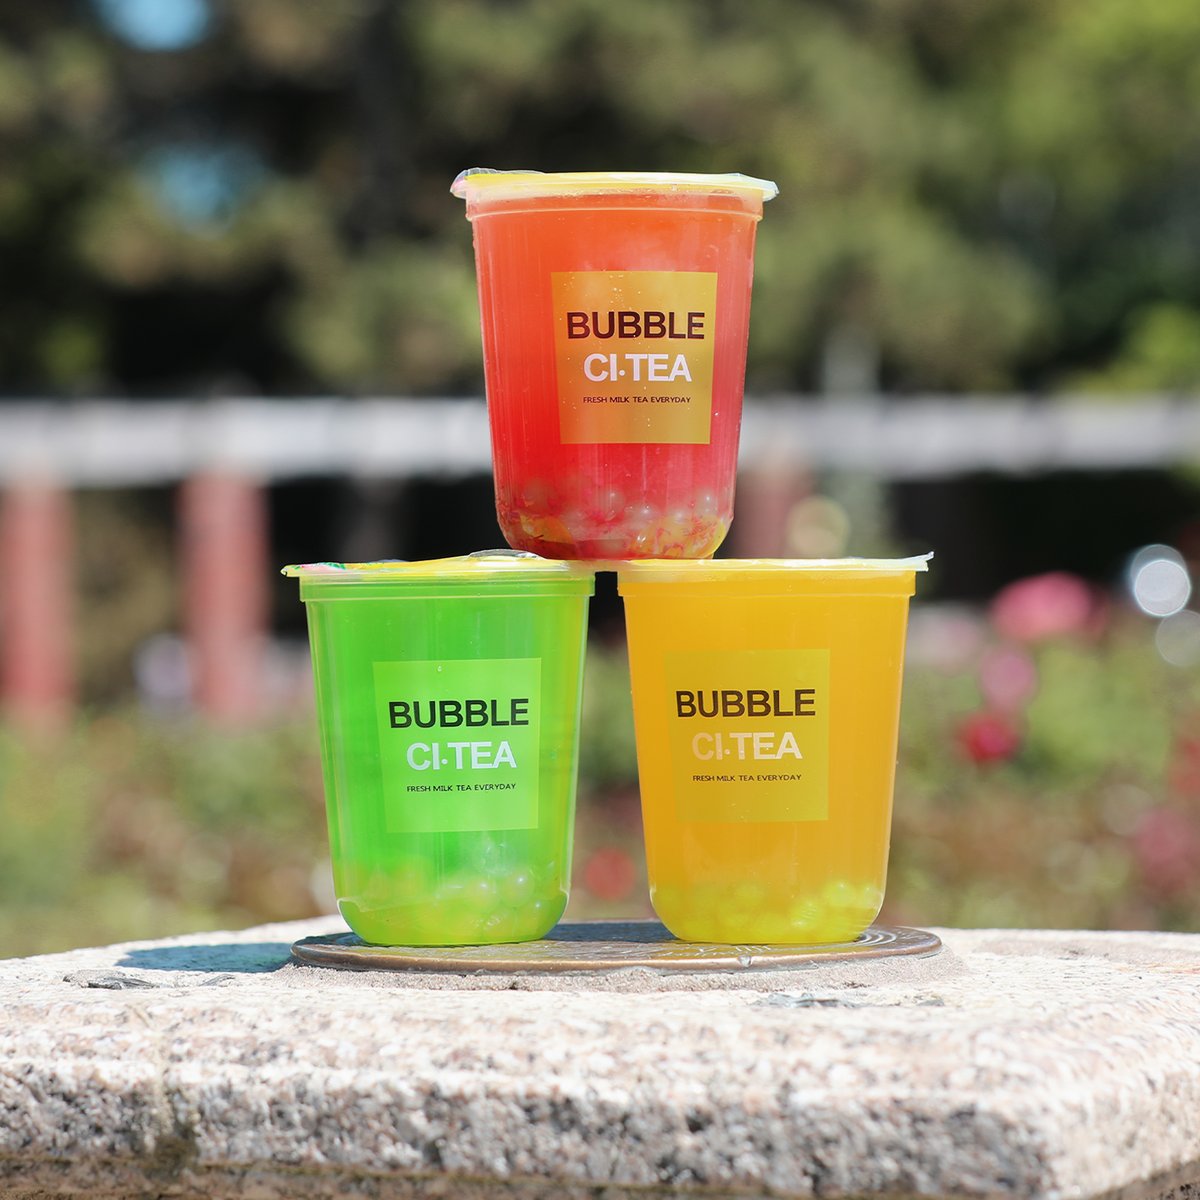 Save the date! 📅 @bubblecitea are opening on Saturday 27th April 🙌 Find them between Zara and Boots. Bubble CiTea serves the refreshing Taiwanese beverage known as “Bubble Tea.” Have you tried it?